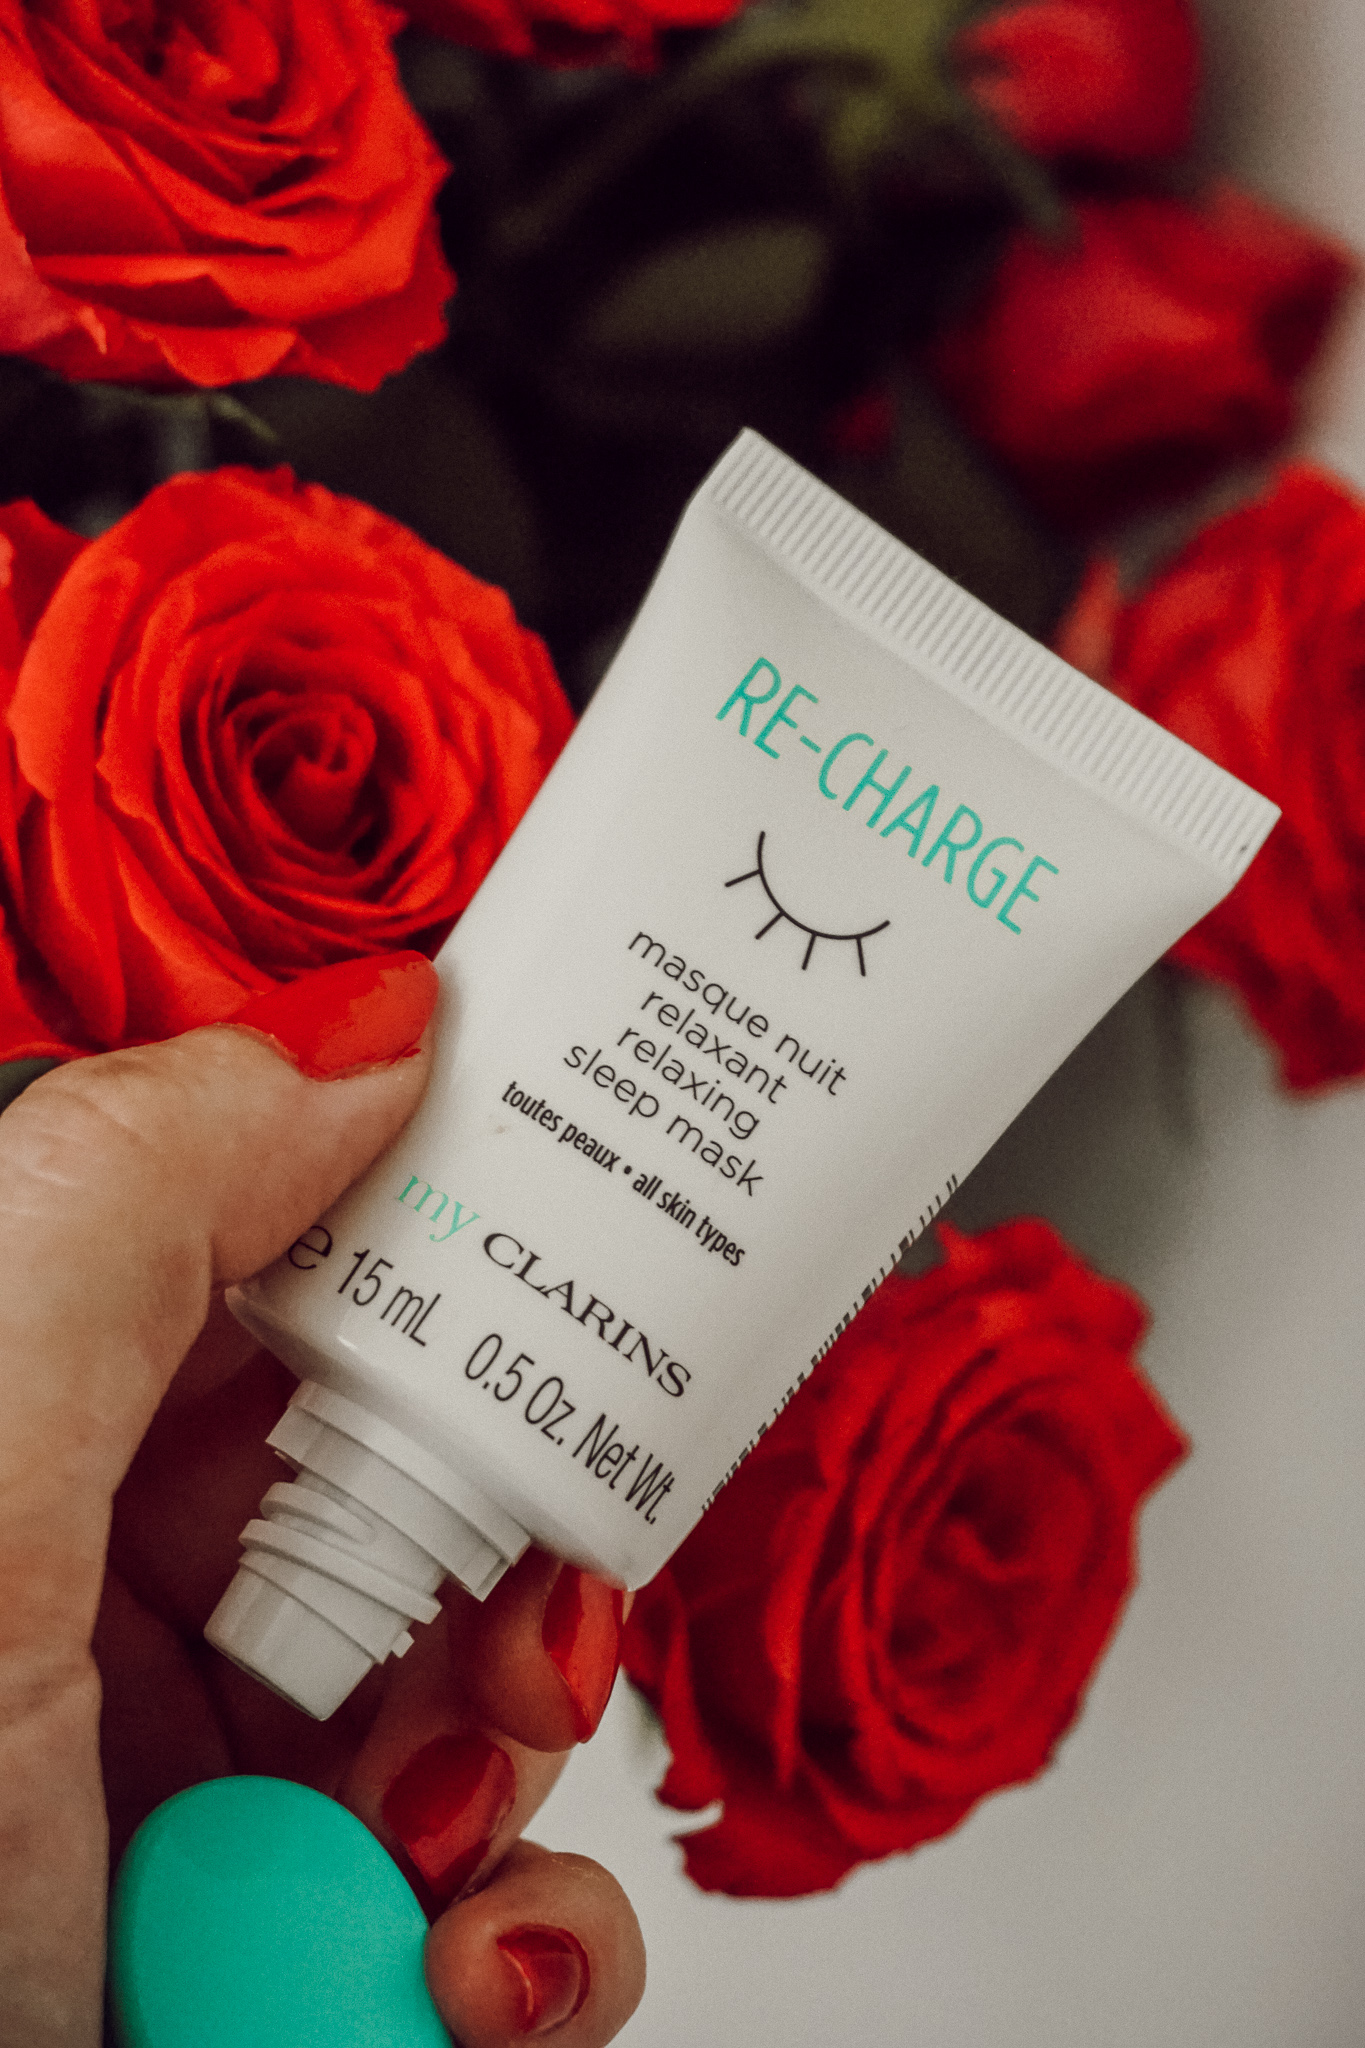 clarins re-charge